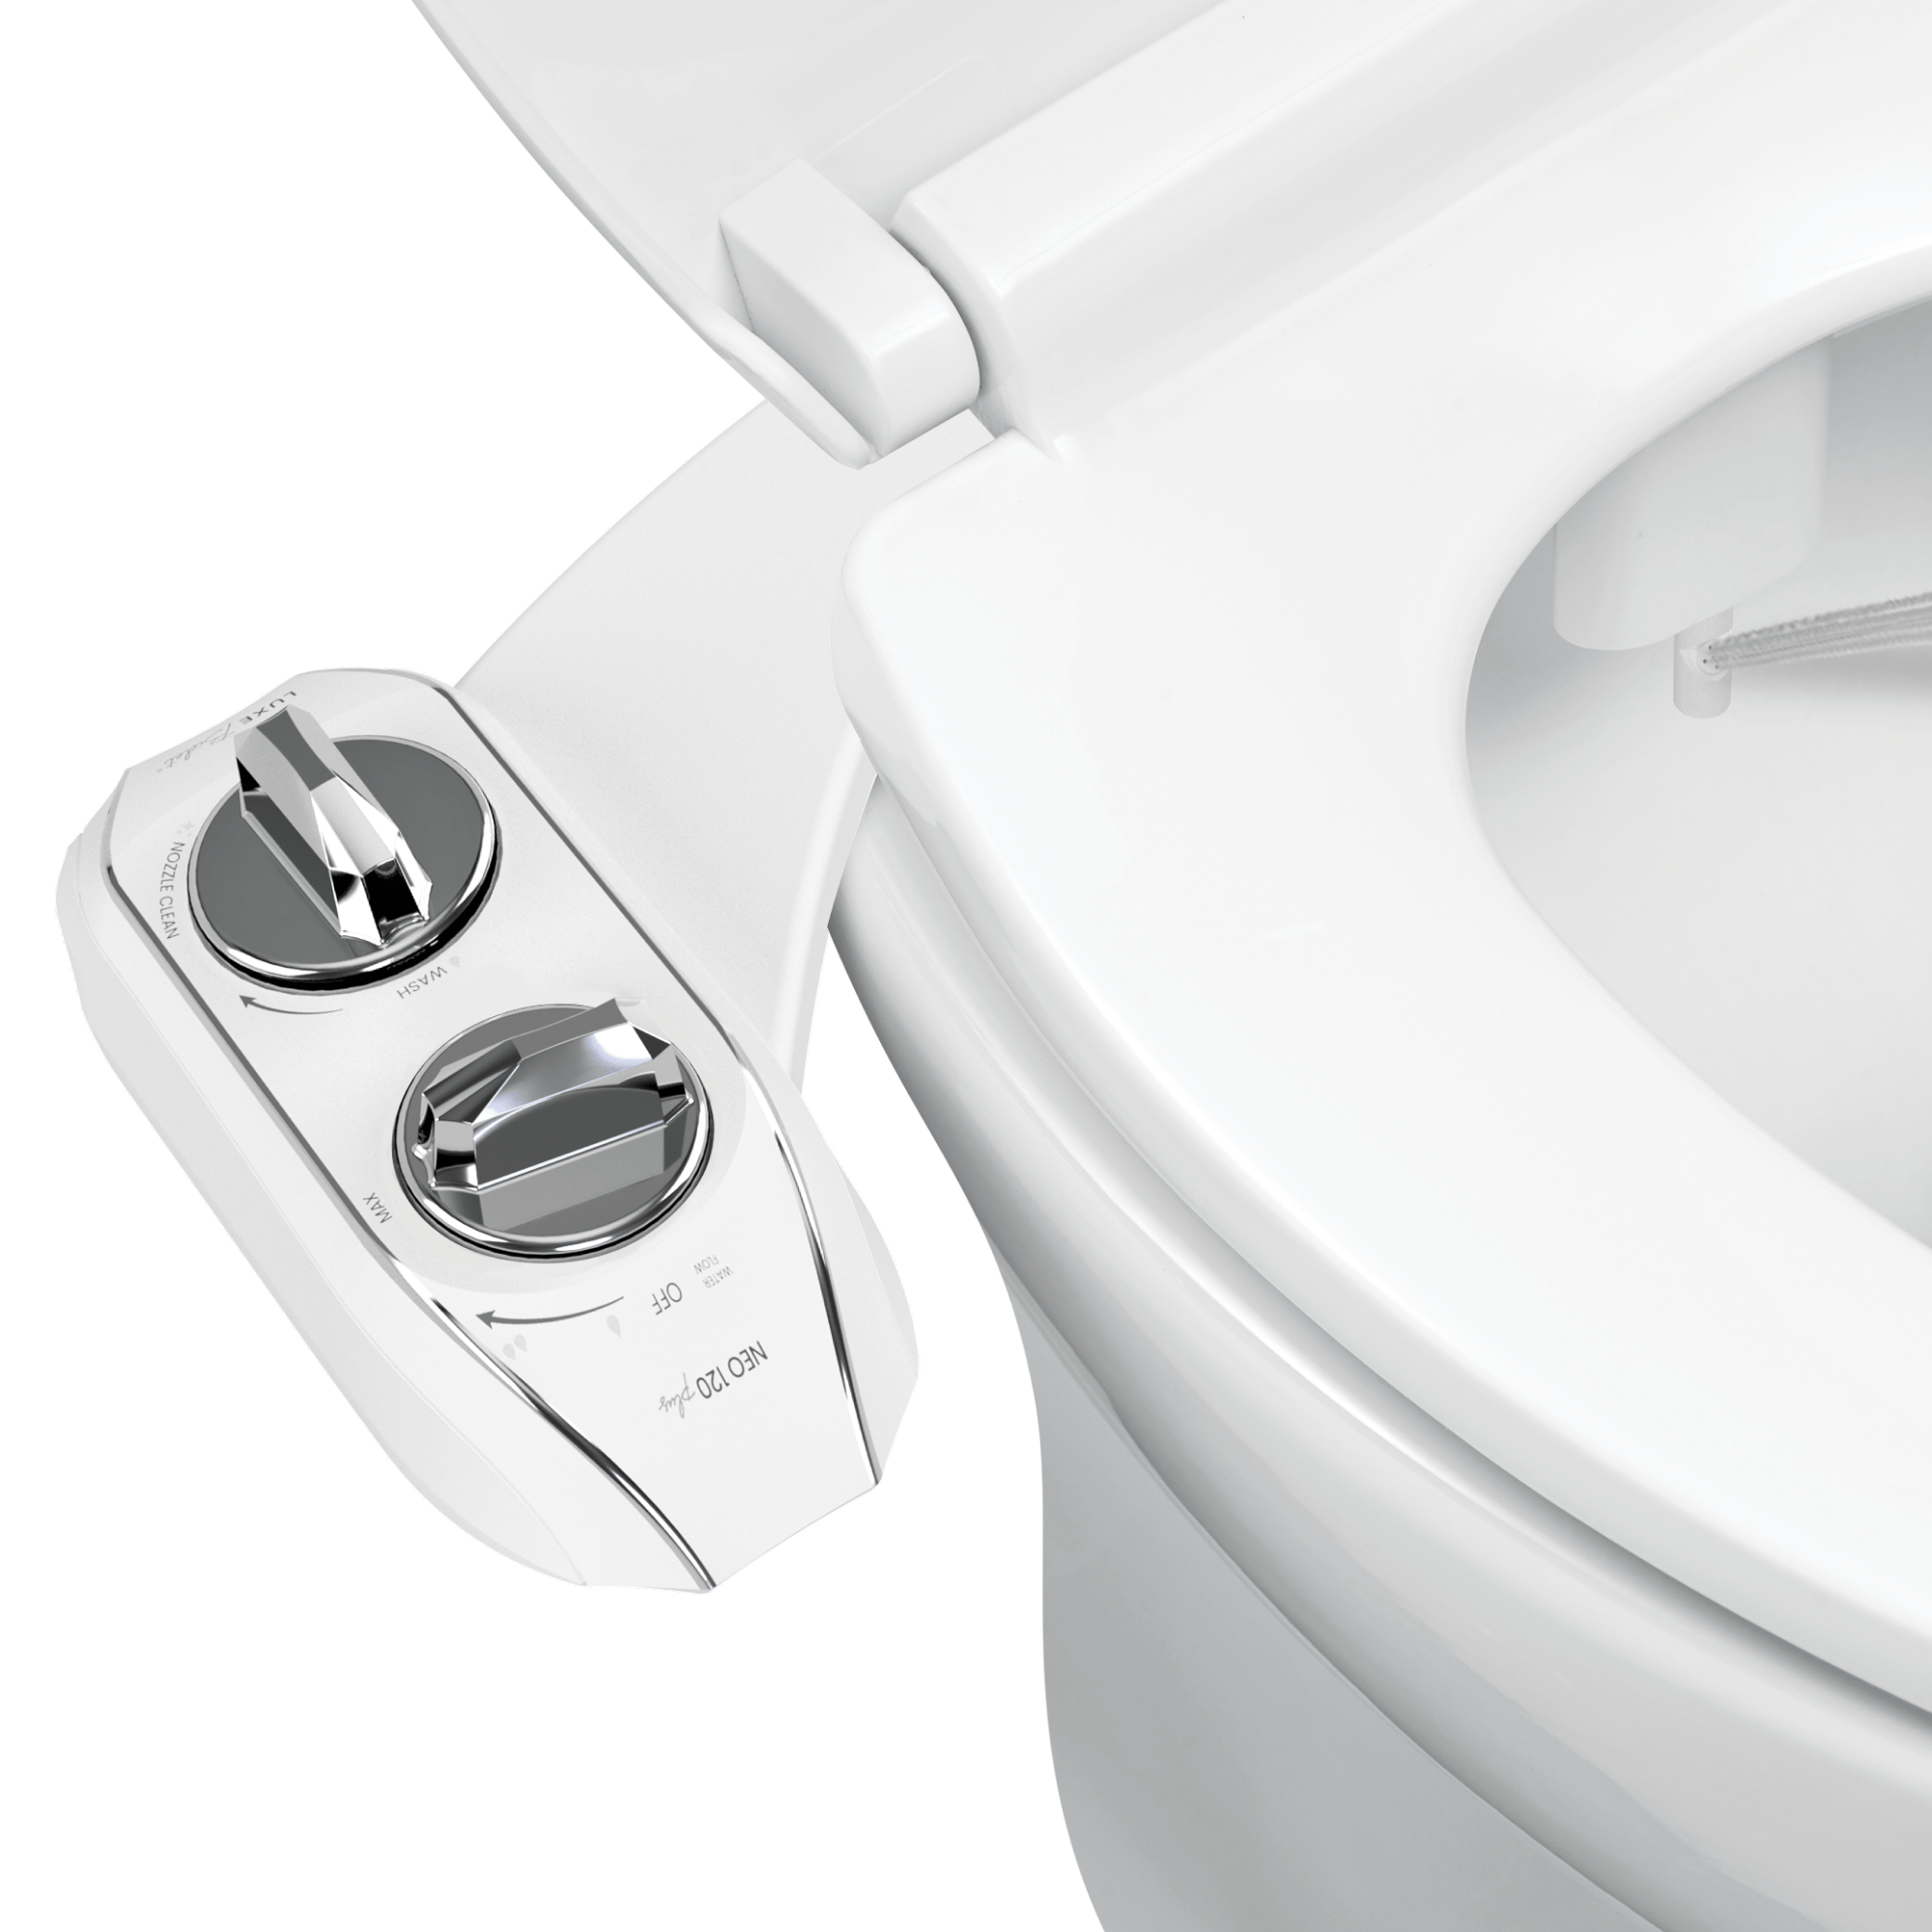 NEO 120 Plus: Imperfect Packaging - NEO 120 Plus Chrome installed on a toilet with water spraying from nozzles